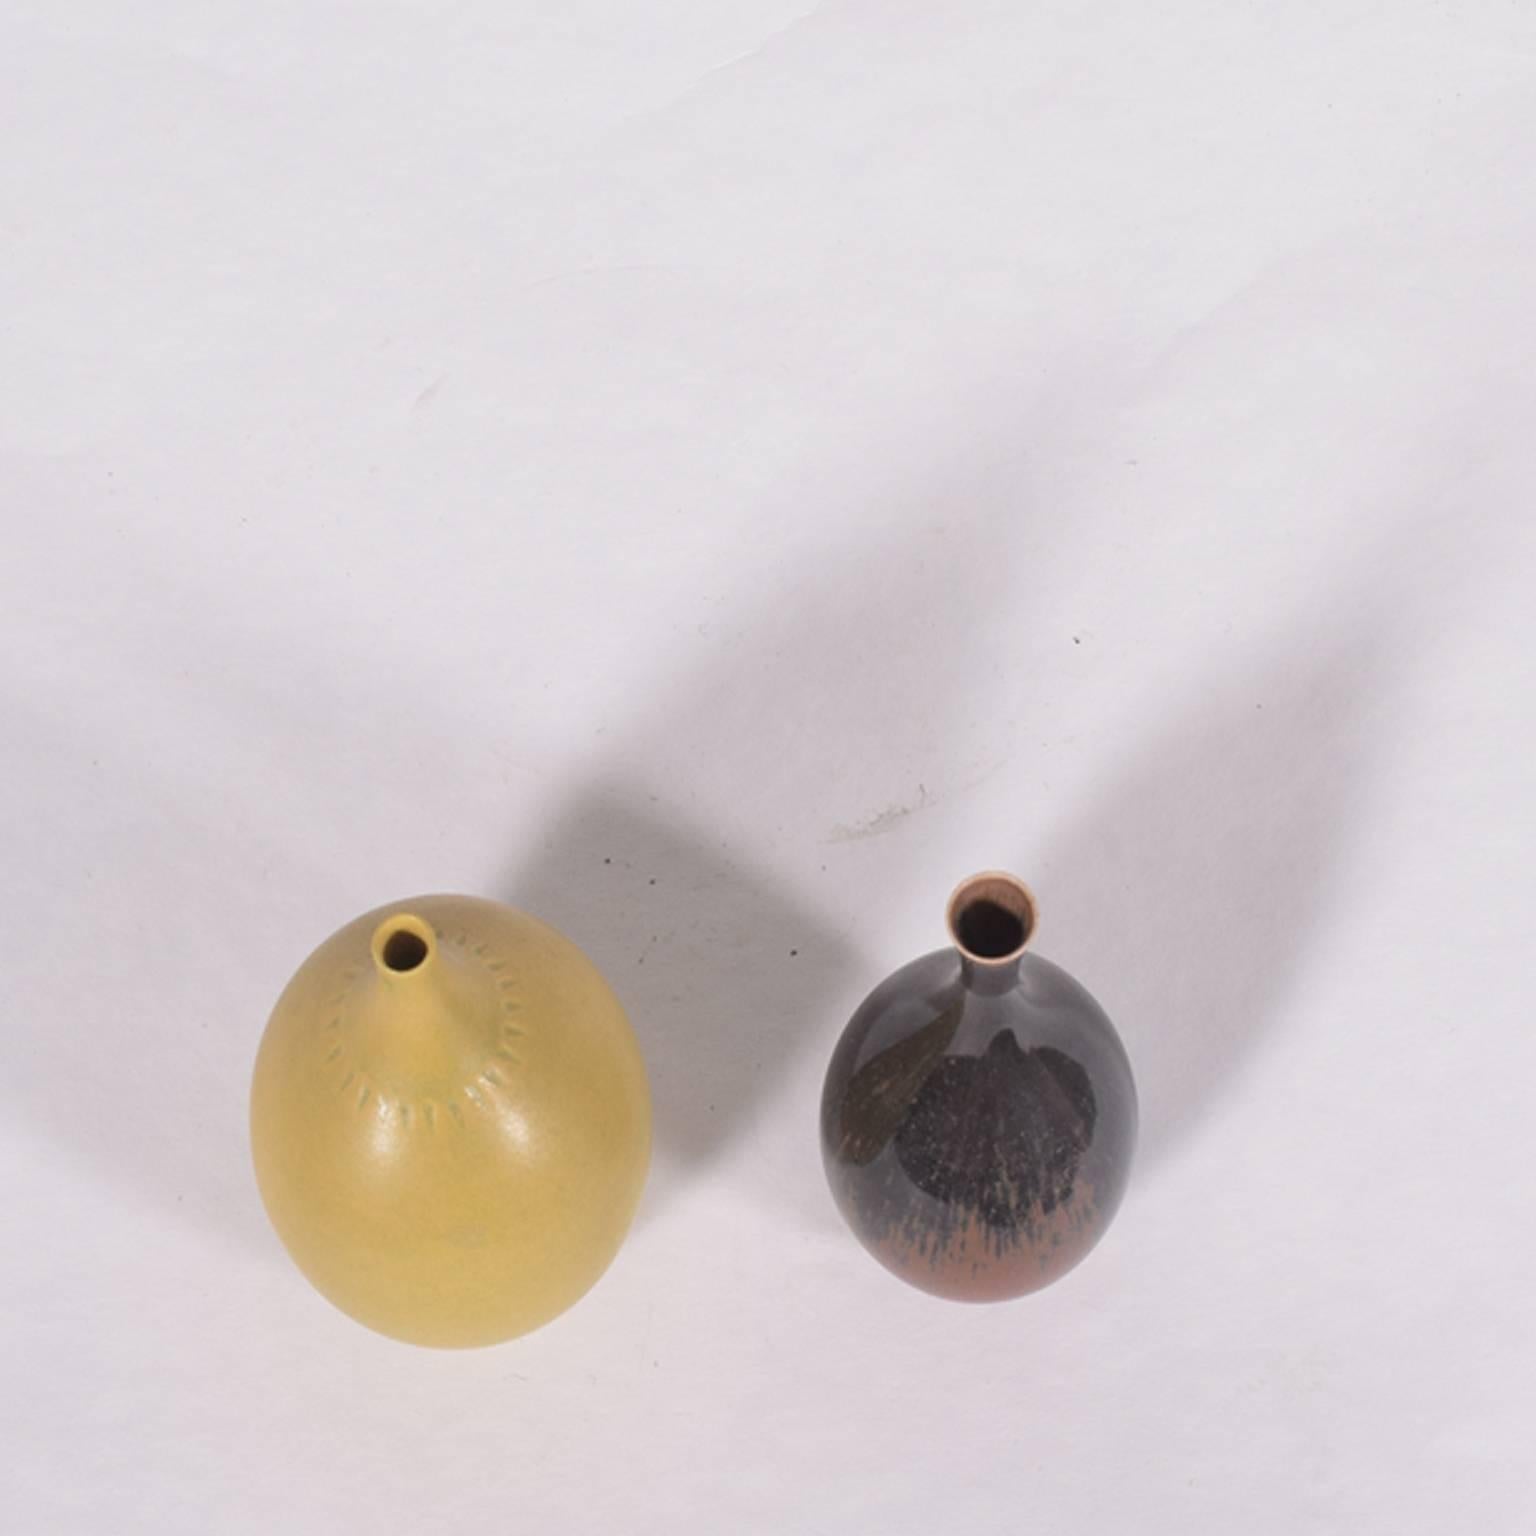 Berndt Friberg was known for his delicate and beautiful shapes and glazings. He designed about 50+ different mini vases and bowls.

Yellow vase: 4" height and 2.75 diameter.